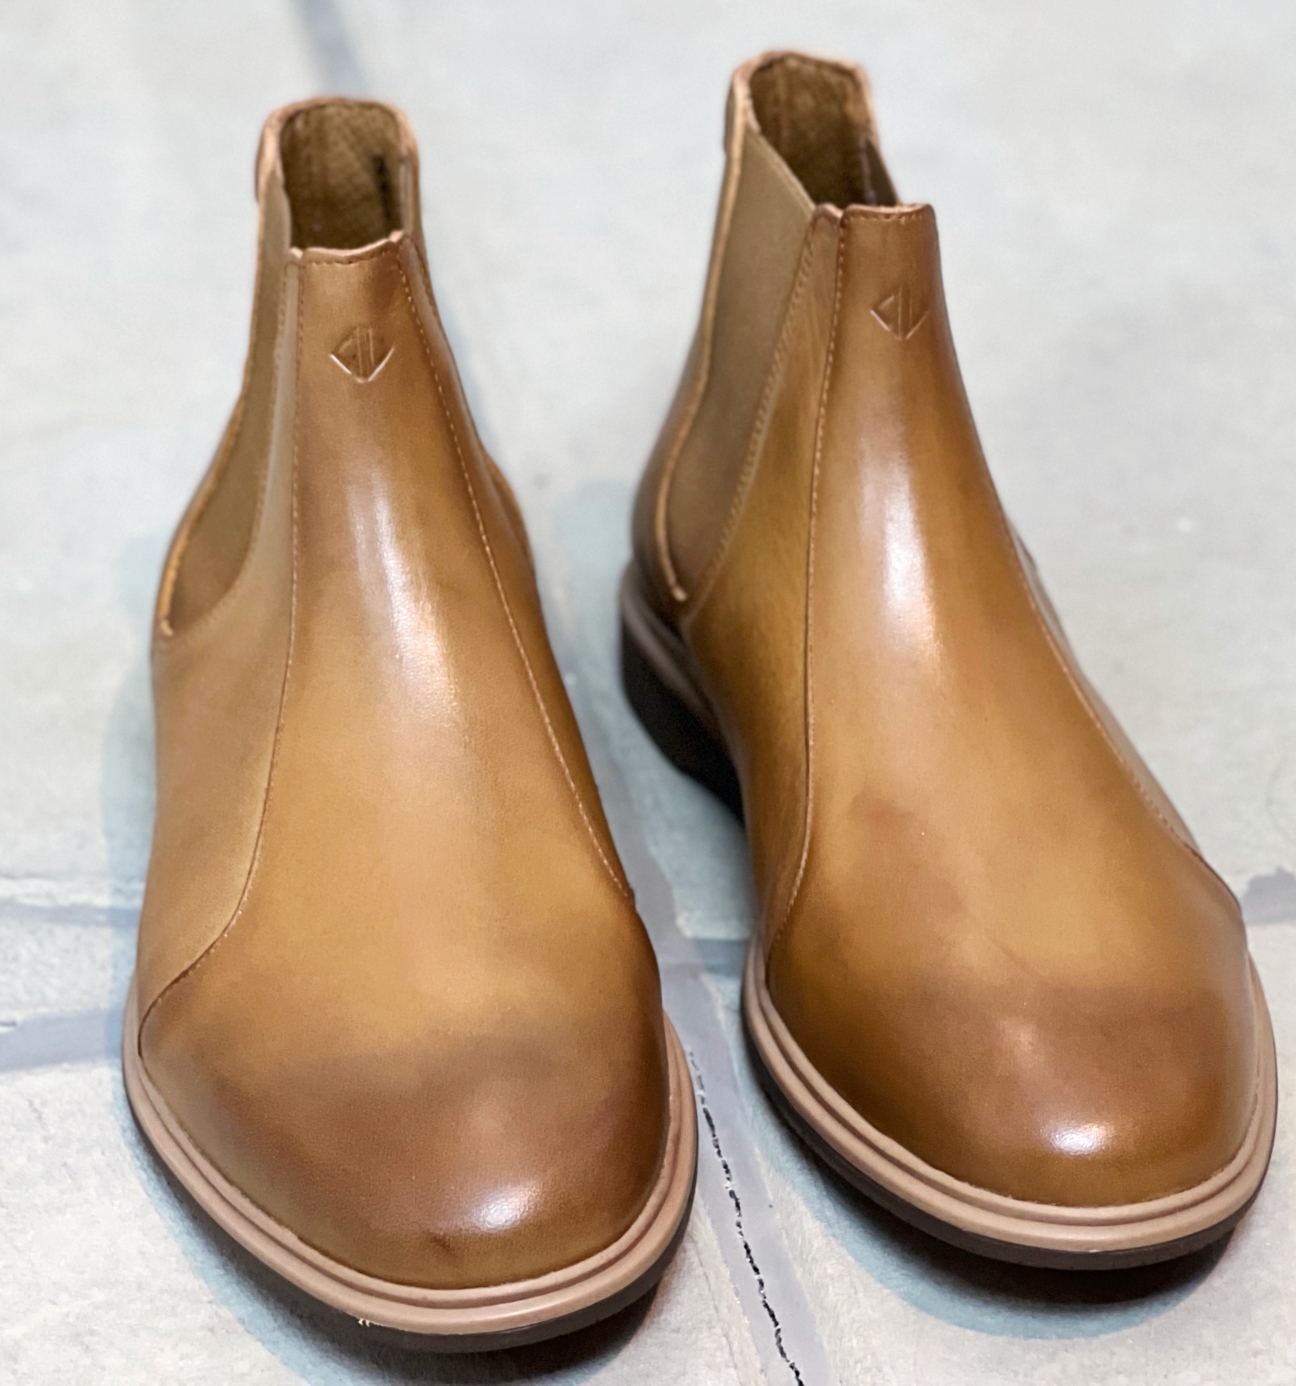 Featured image for “Amberjack Chelsea Boots Review: The Best Chelsea Boot Ever Made?!”